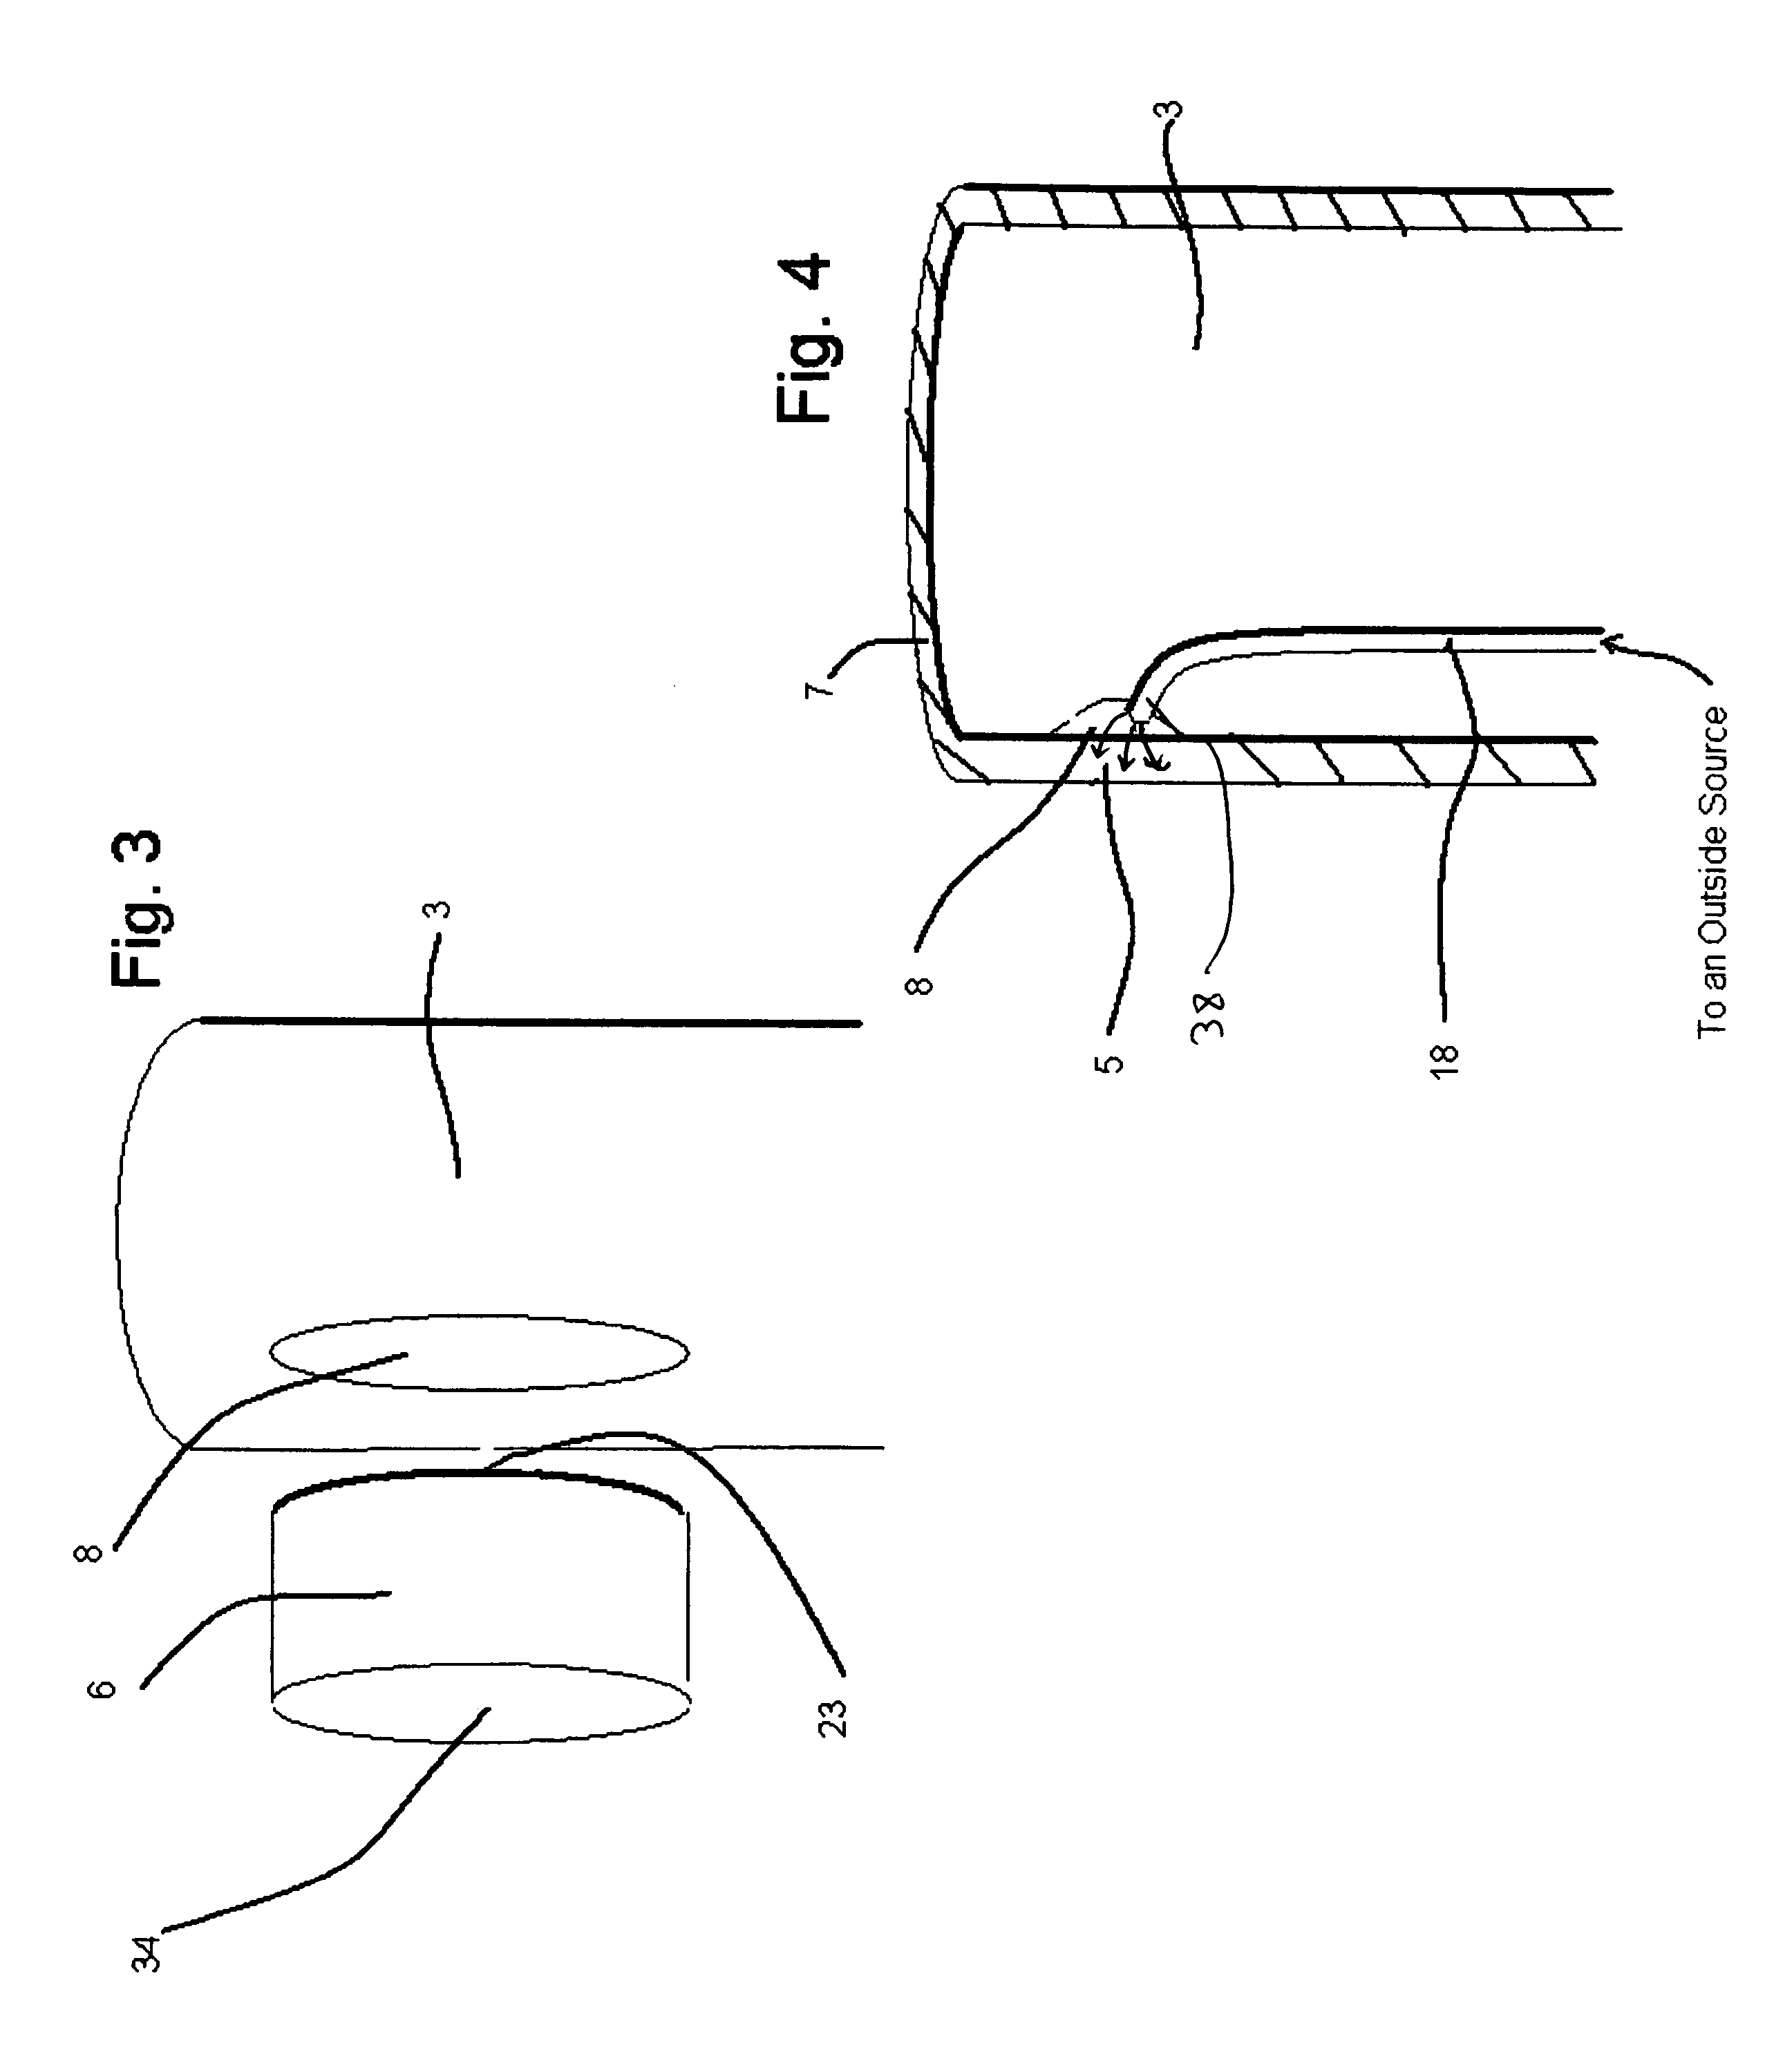 Means and method to prevent liquids and flying debris from blocking the viewing pathway of an optical element